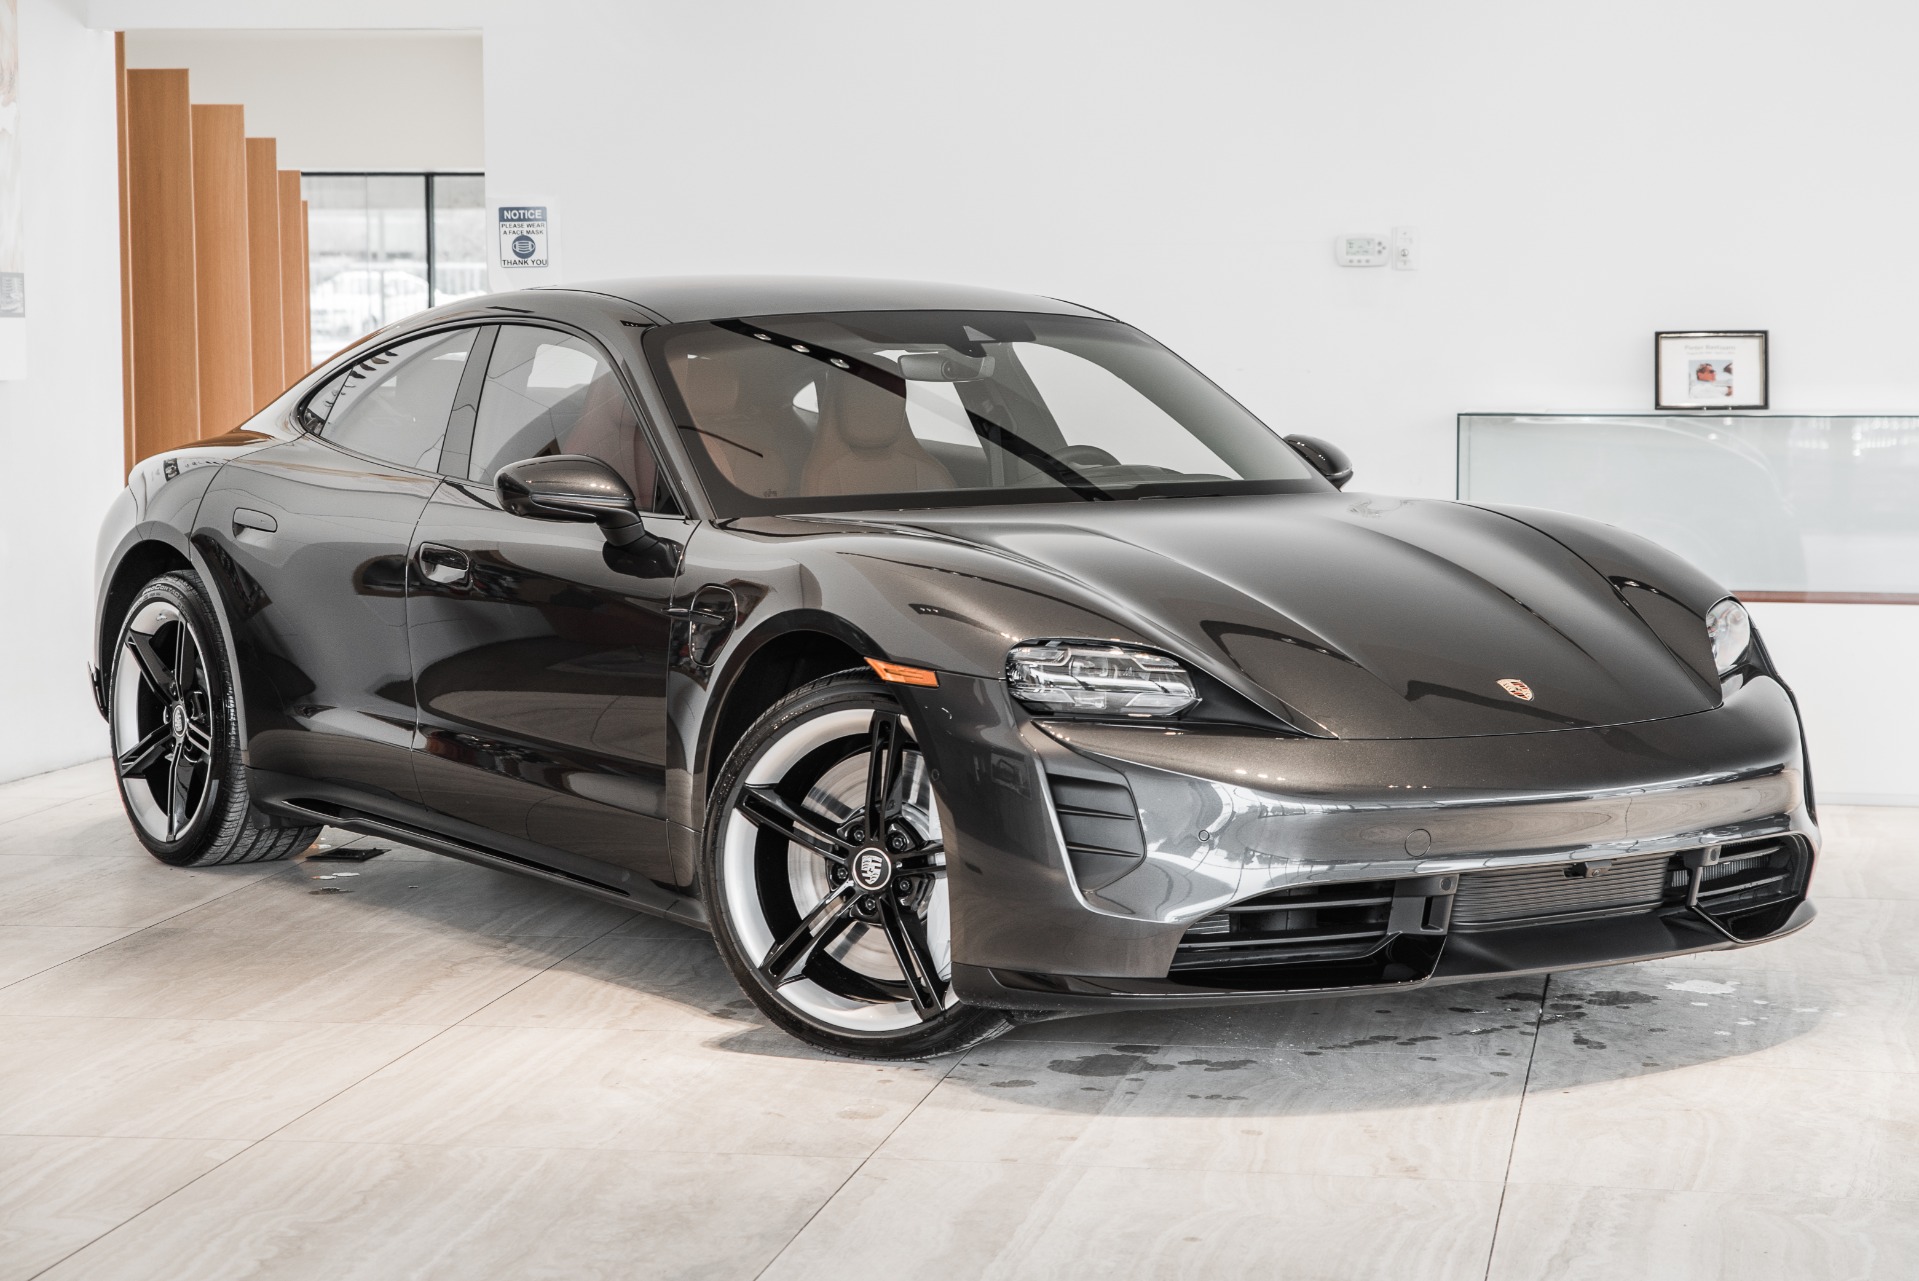 Used 2020 Porsche Taycan Turbo For Sale (Sold)